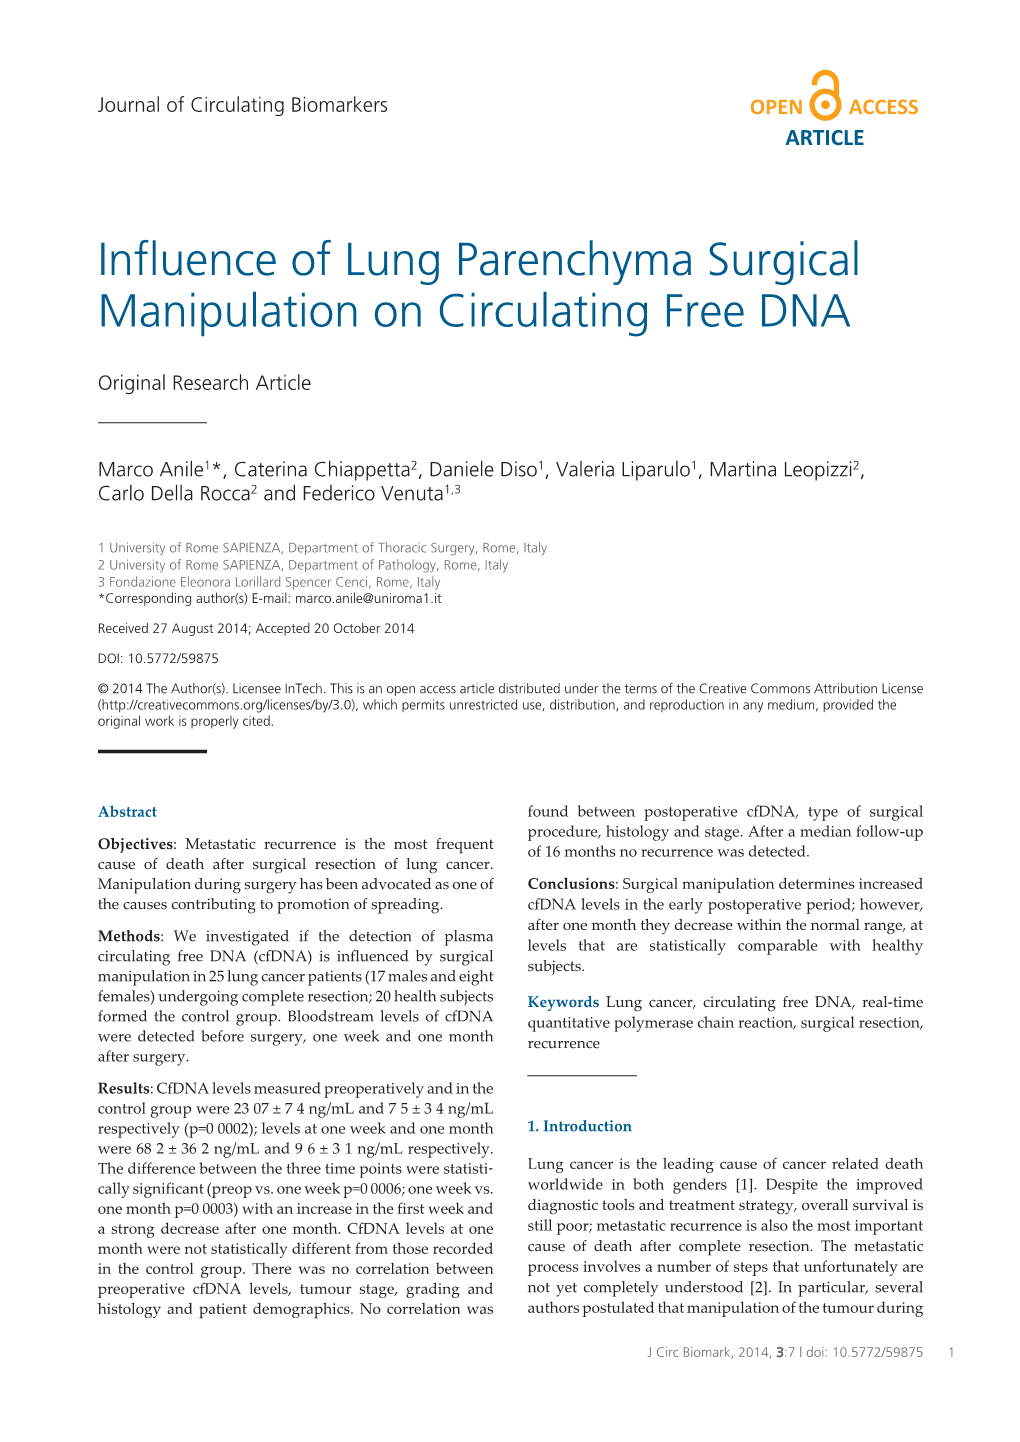 Influence of Lung Parenchyma Surgical Manipulation on Circulating Free DNA